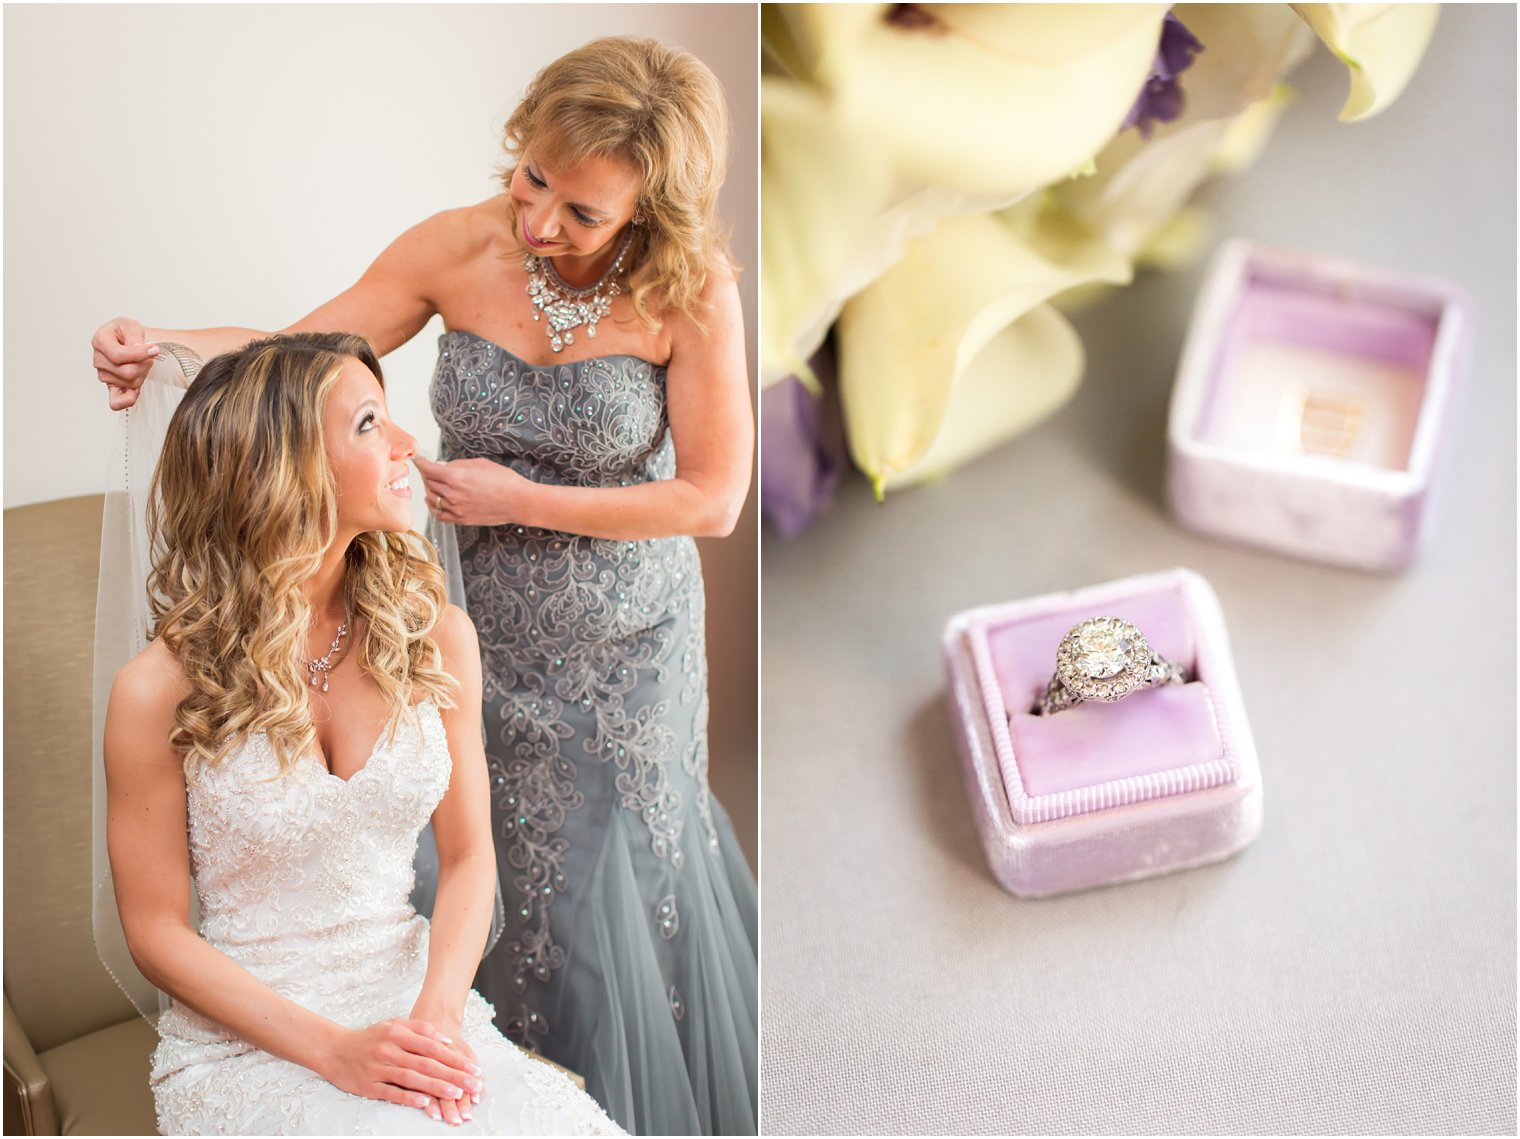 Bride getting ready with her mother | Photos by Idalia Photography